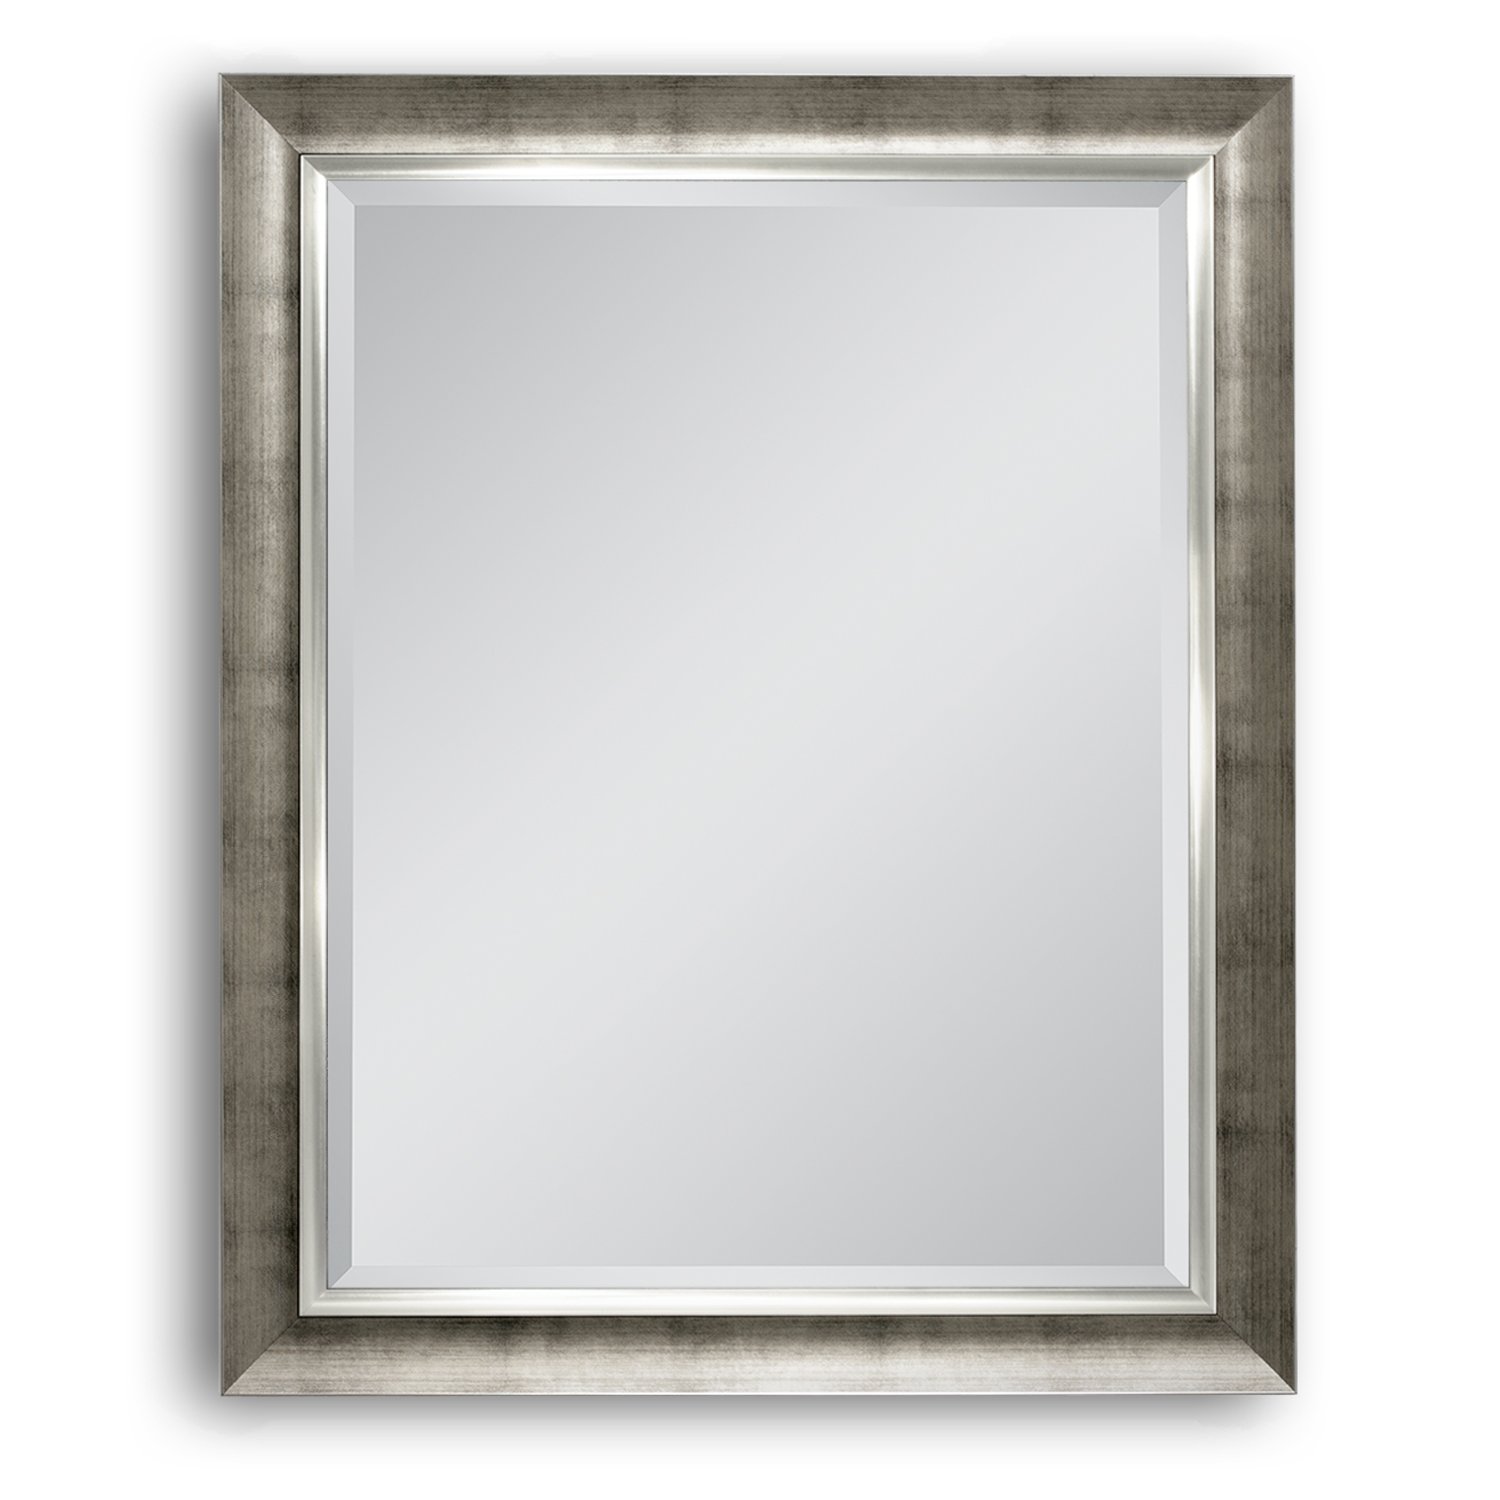 8036 27.5 X 33.5 In. Brushed Champagne Mirror